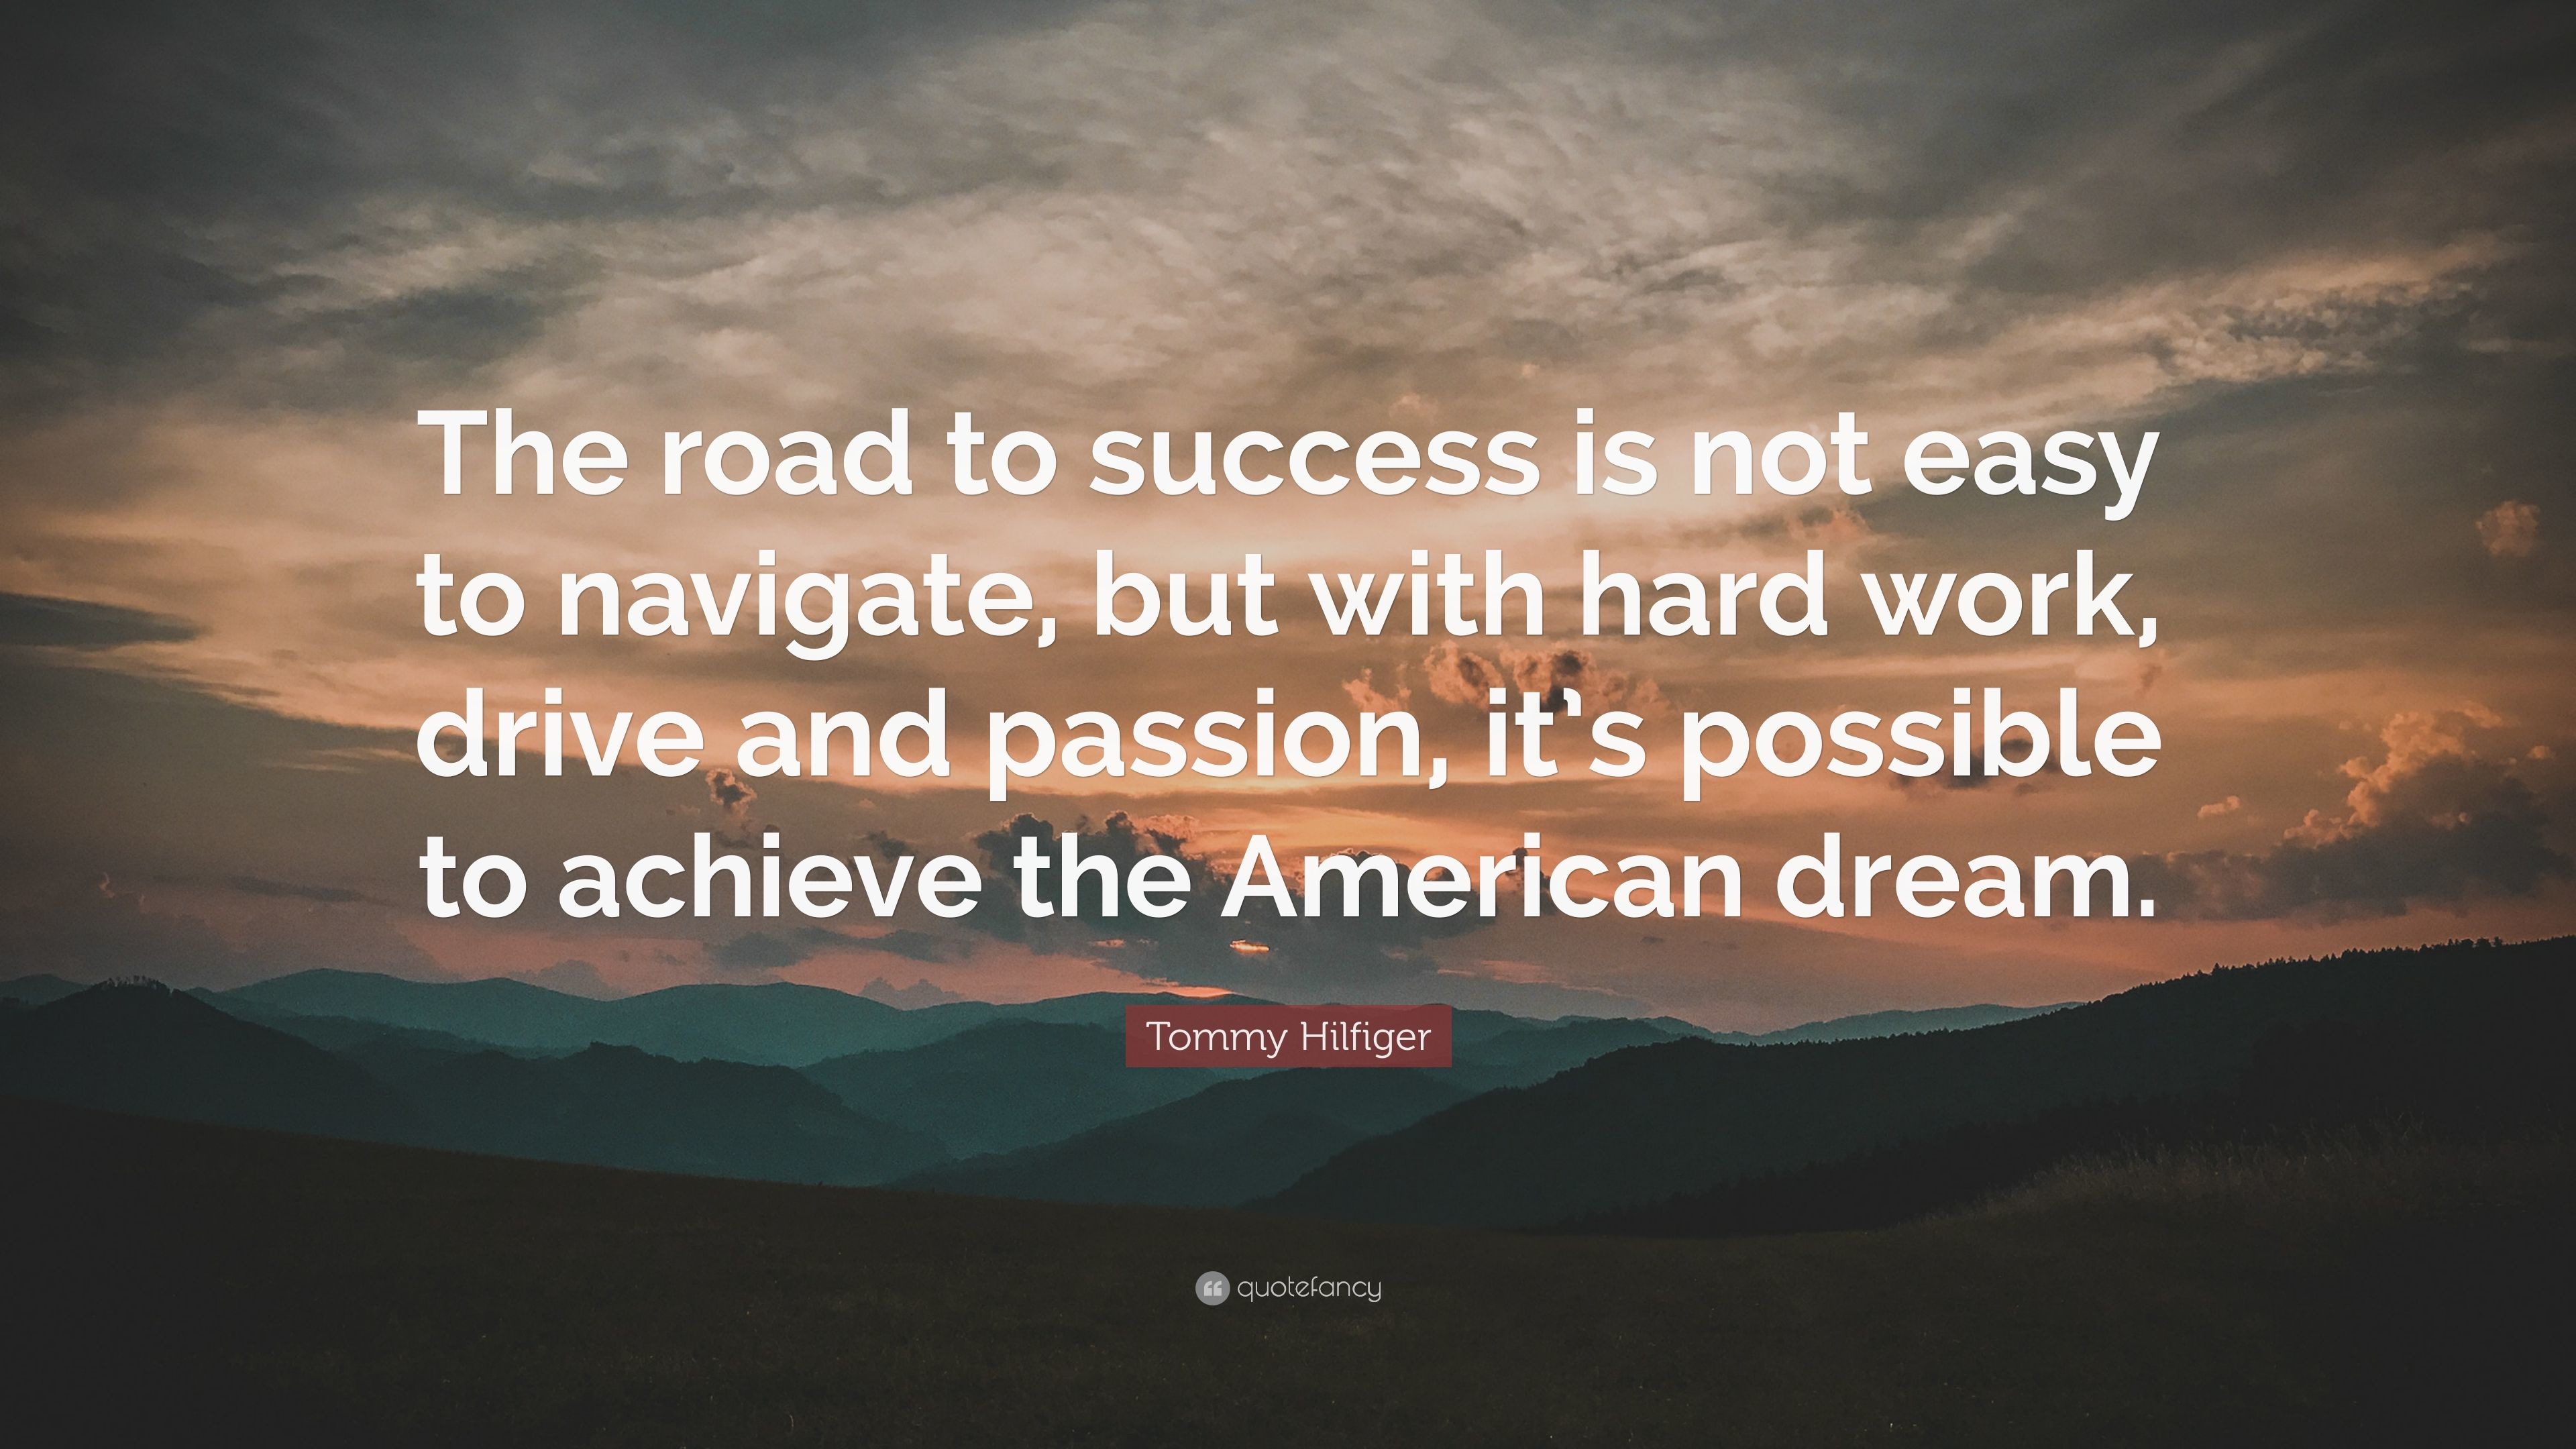 3840x2160 Tommy Hilfiger Quote: “The road to success is not easy to navigate, but